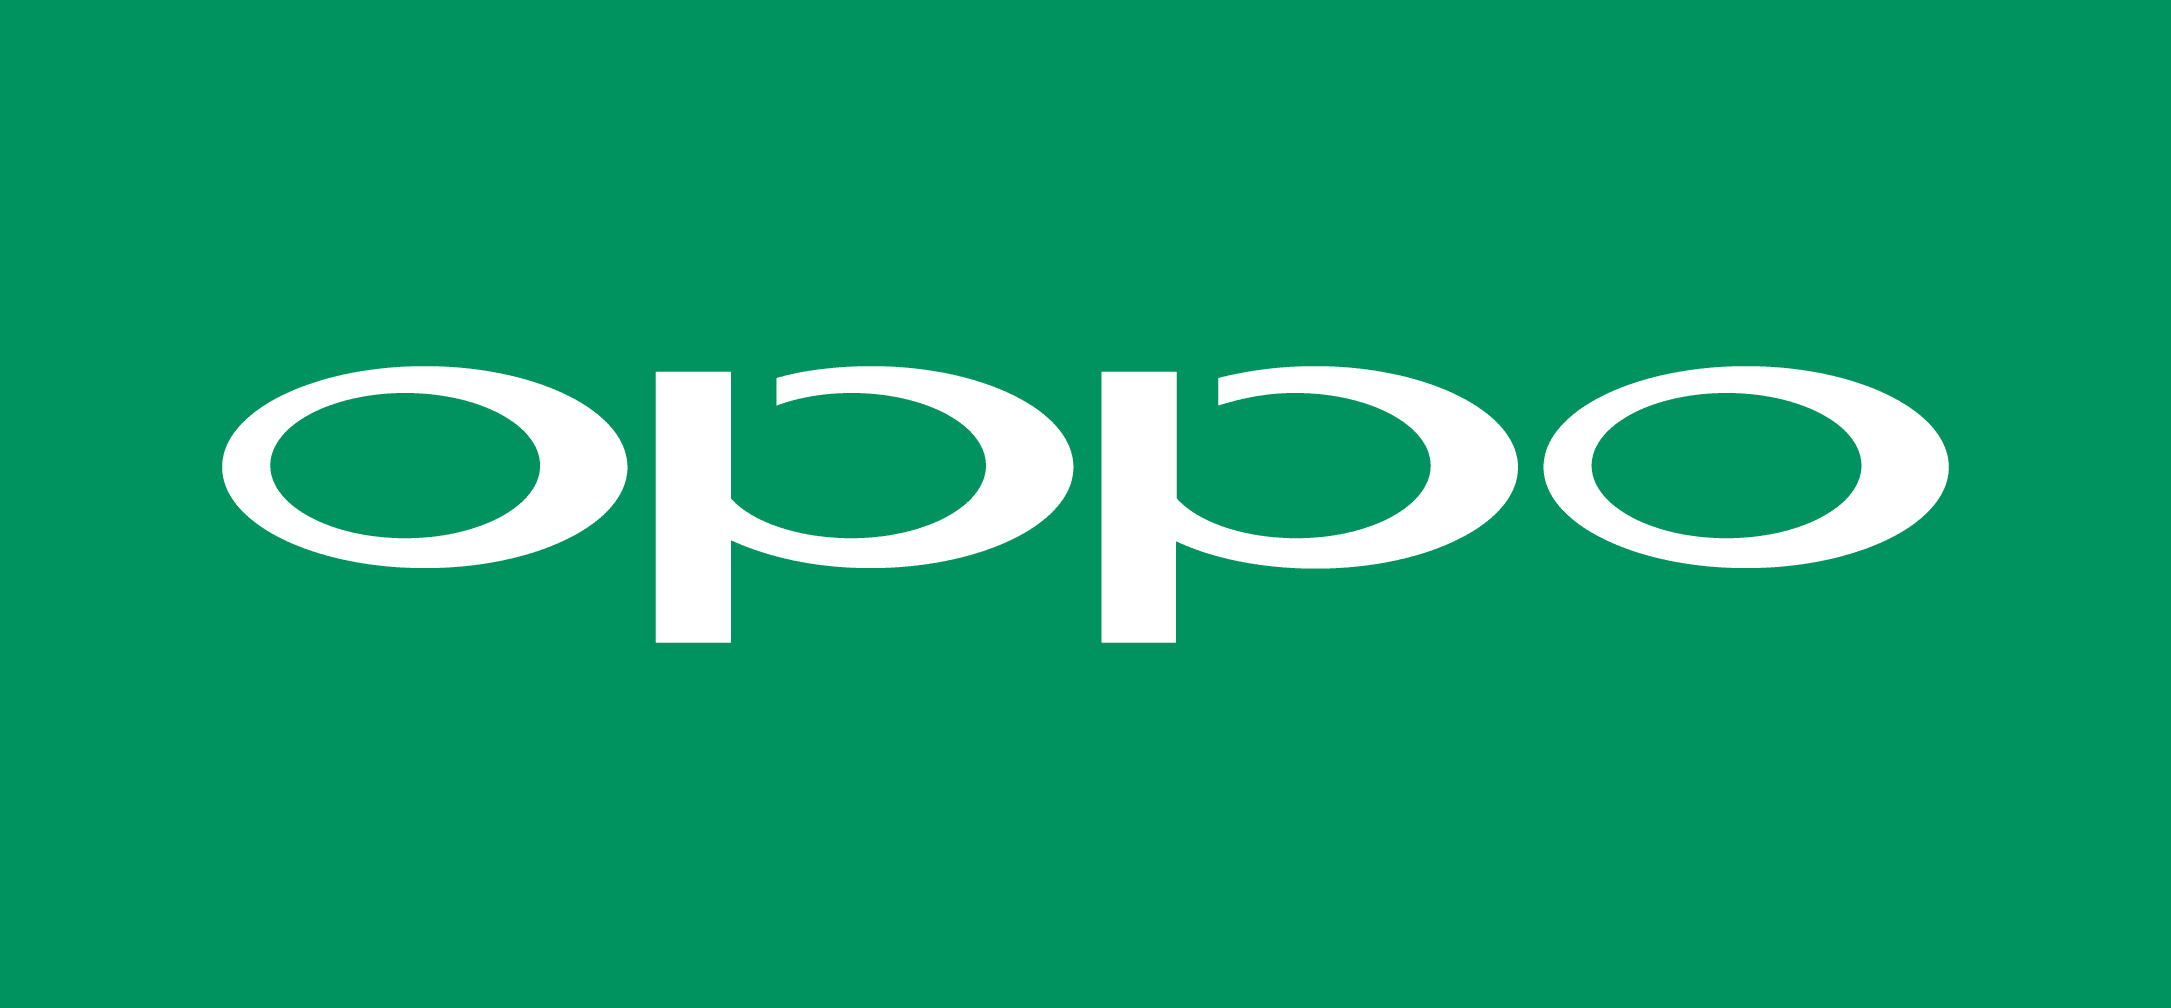 oppo logo wiki1550996980 Realme and Oppo gets separated